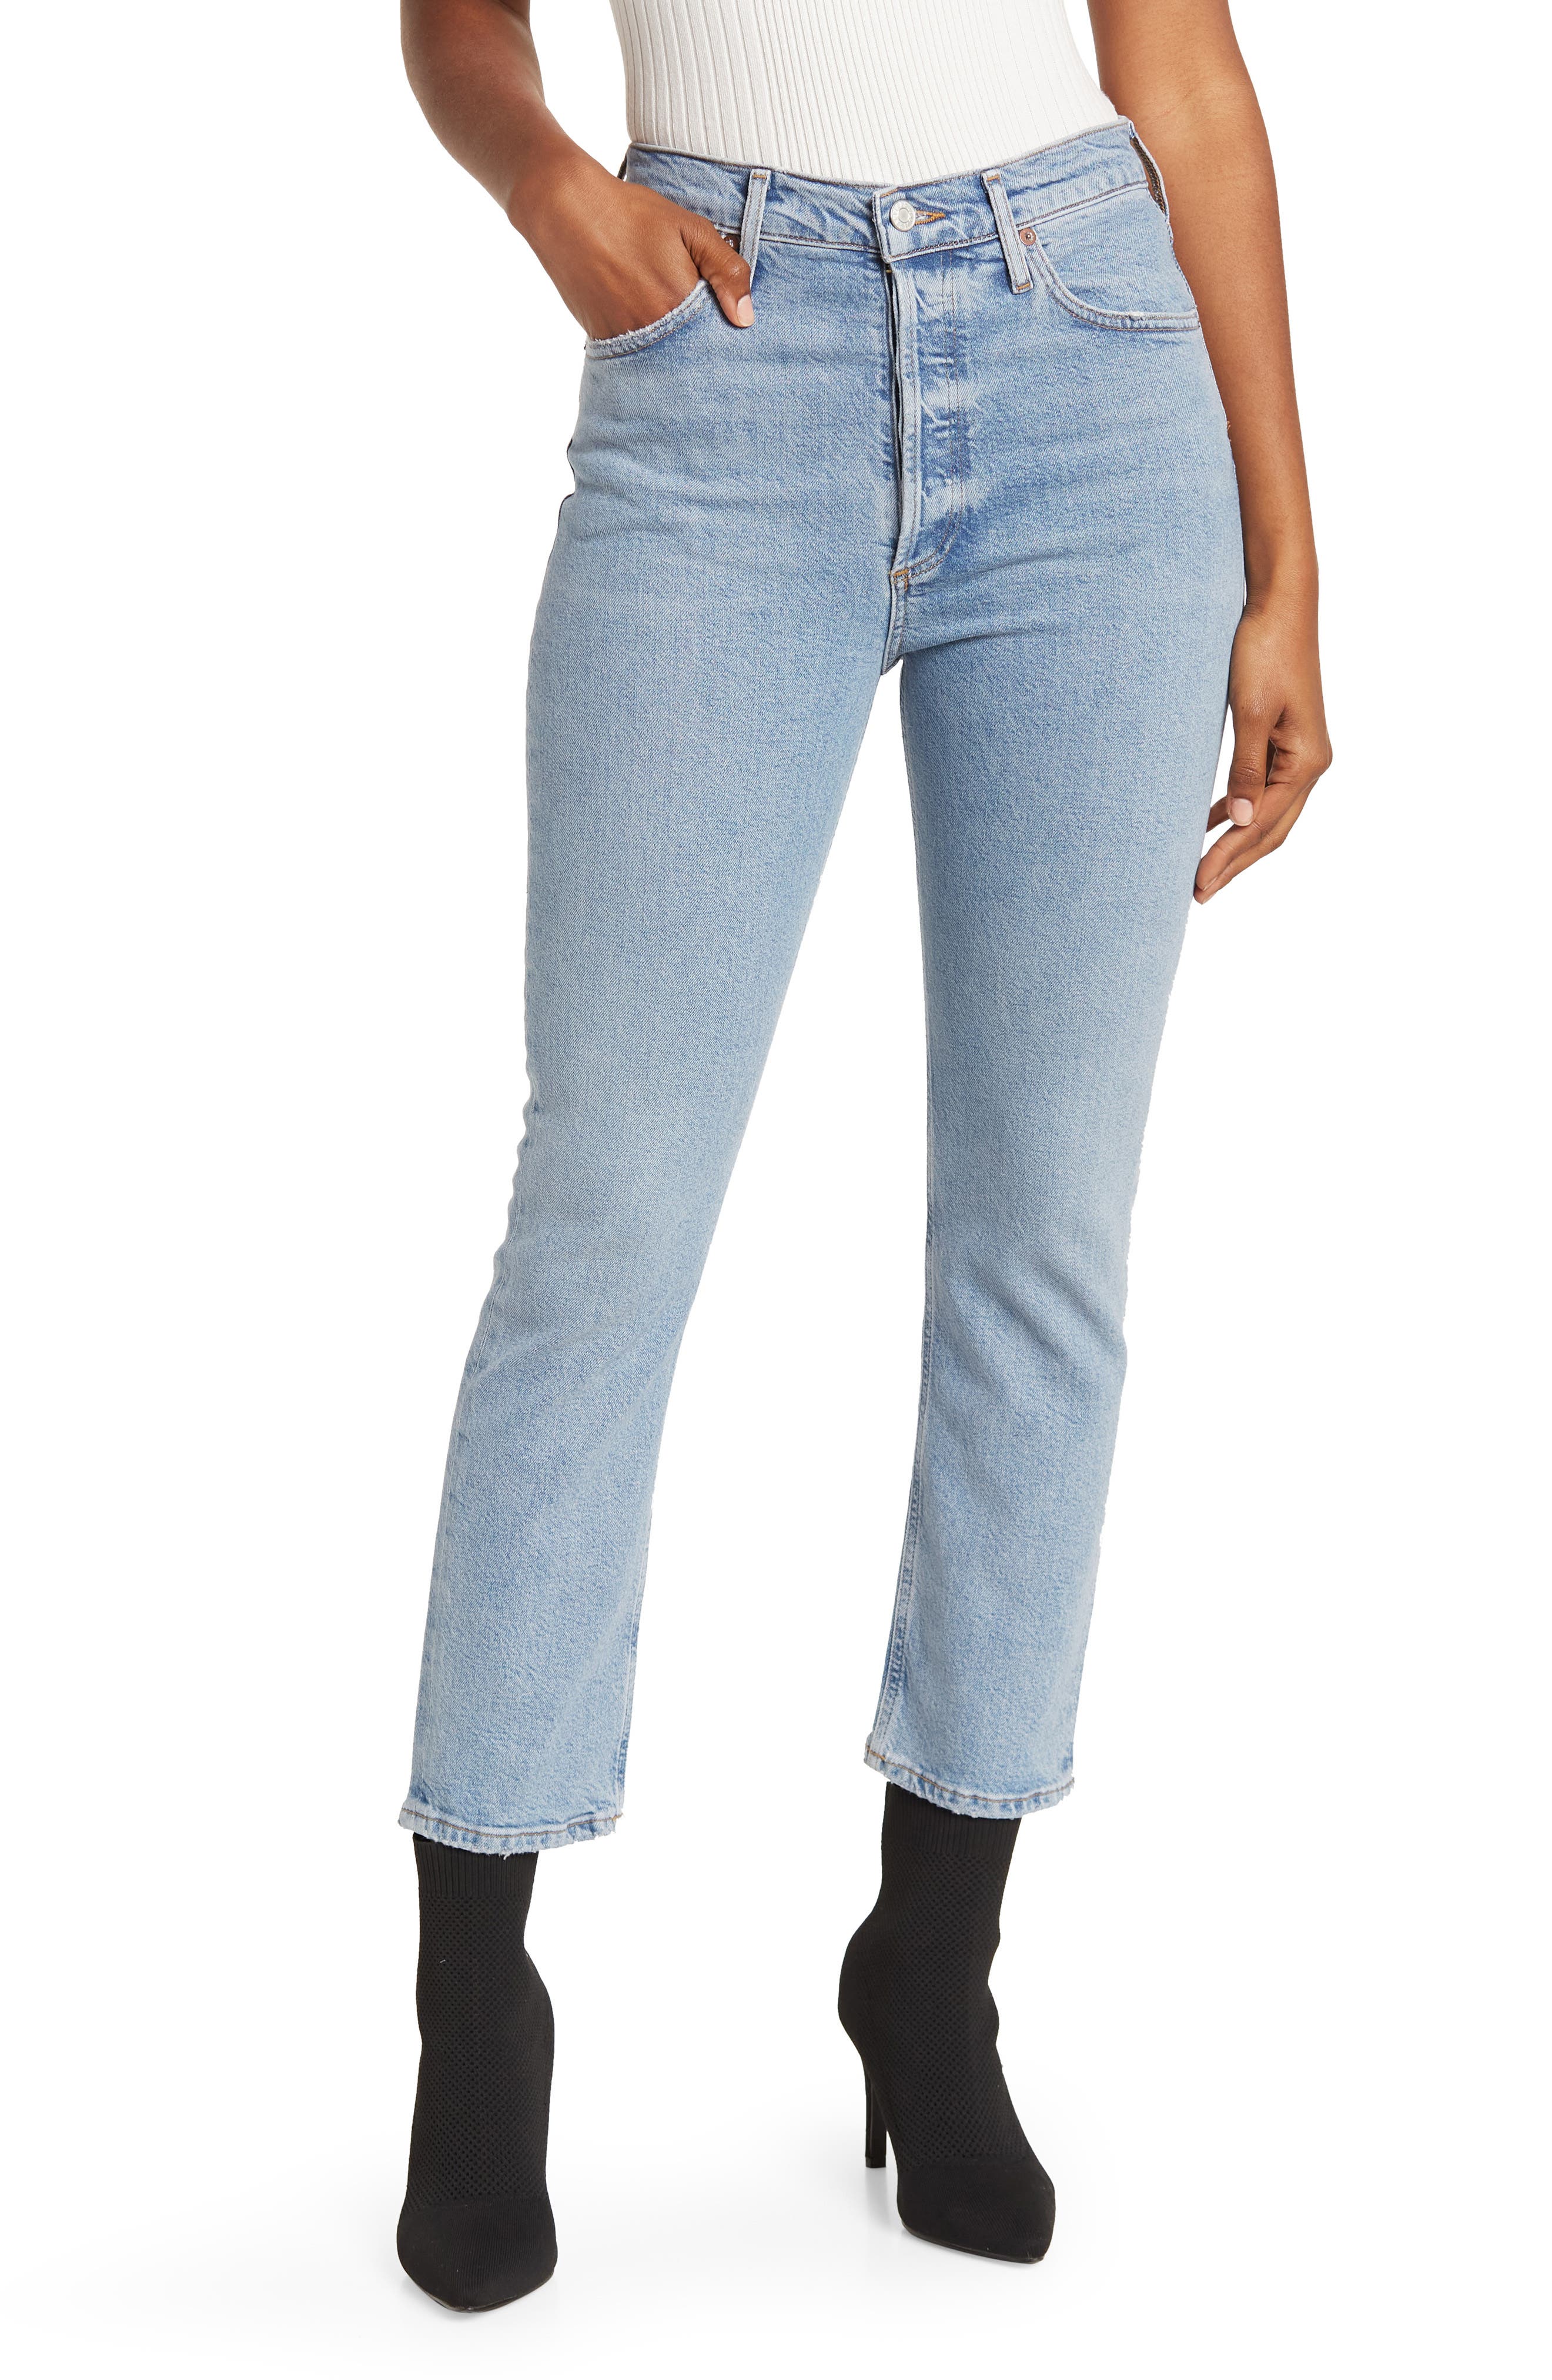 AGOLDE Riley High Waist Crop Straight Leg Jeans in Shiver at Nordstrom, Size 32